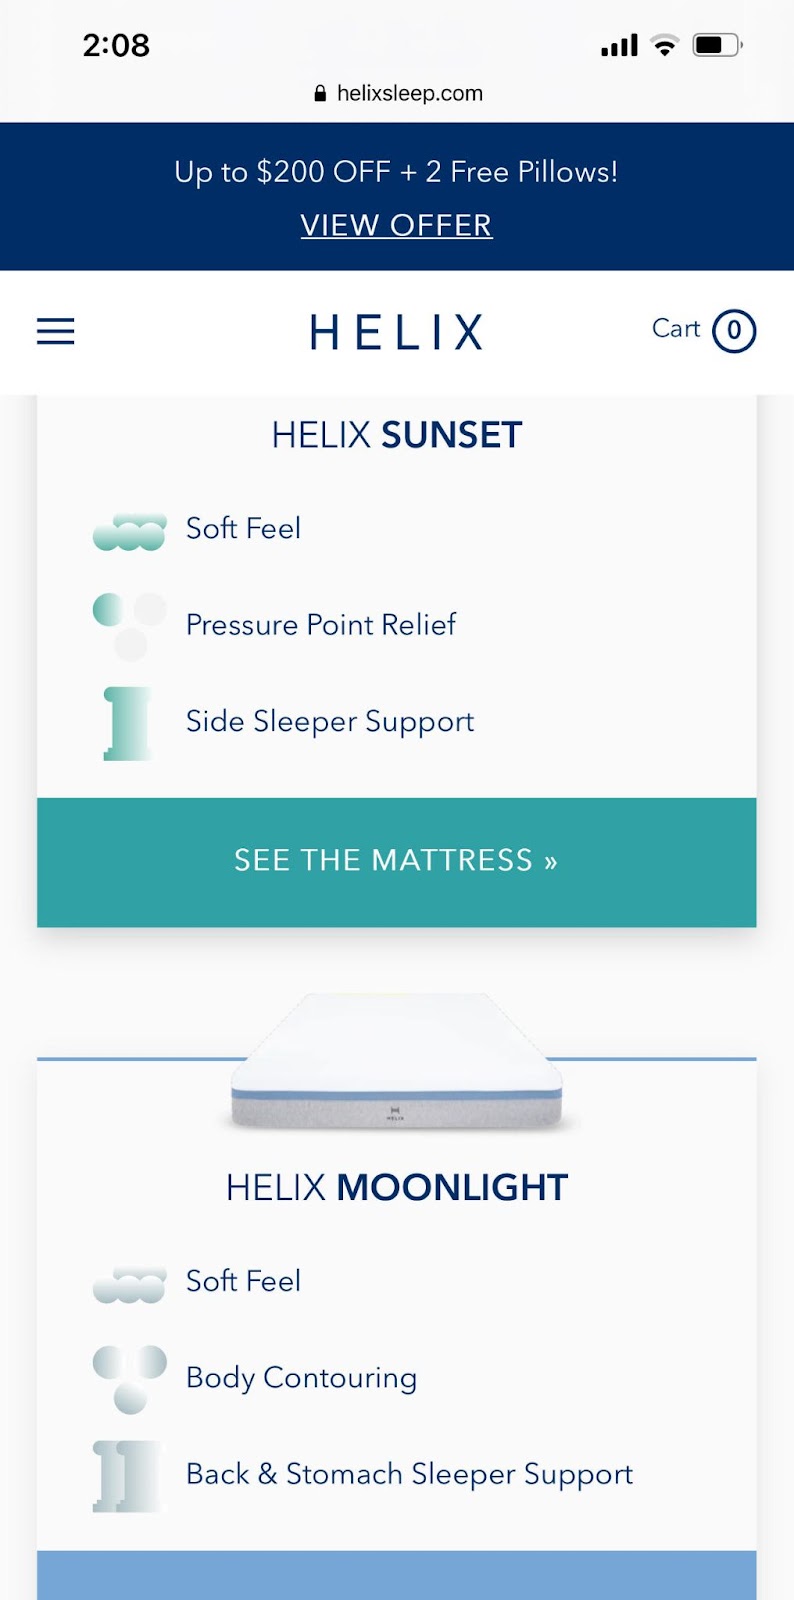 Example of an online retailer selling physical goods: Helix Sleep